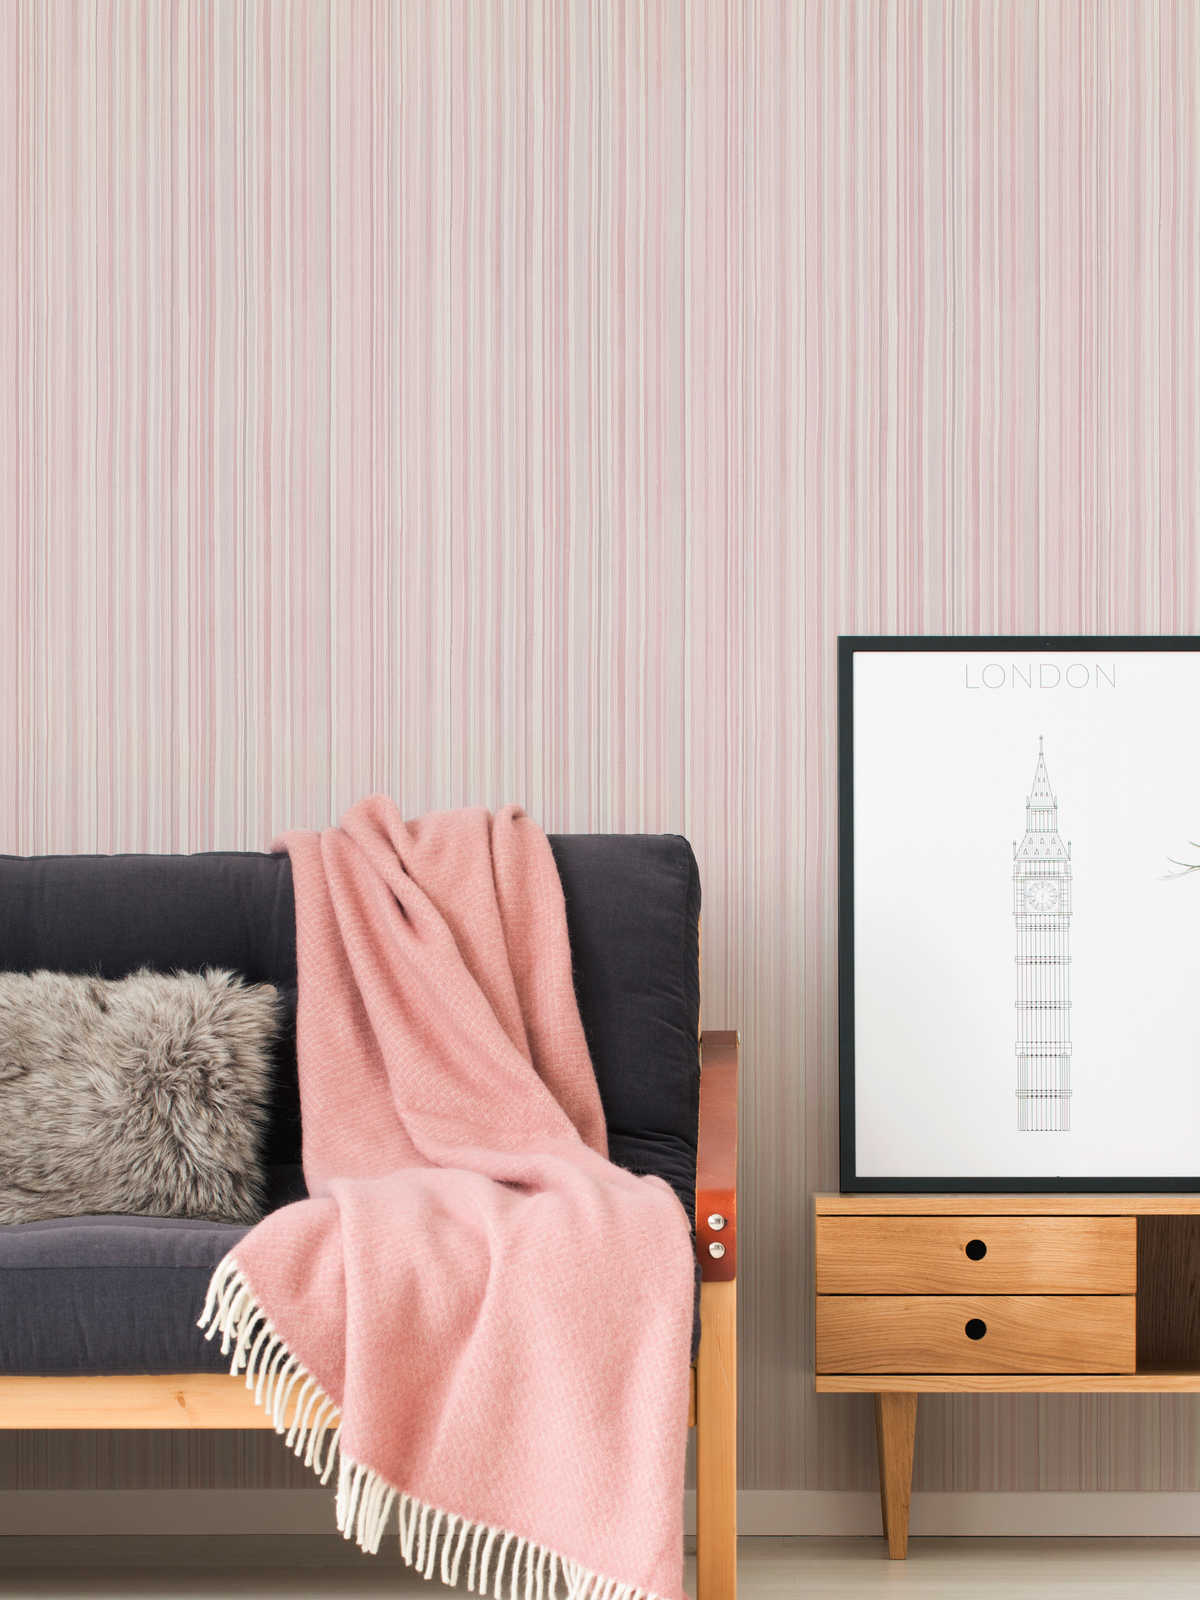             Stripes wallpaper with narrow lines pattern - pink, grey
        